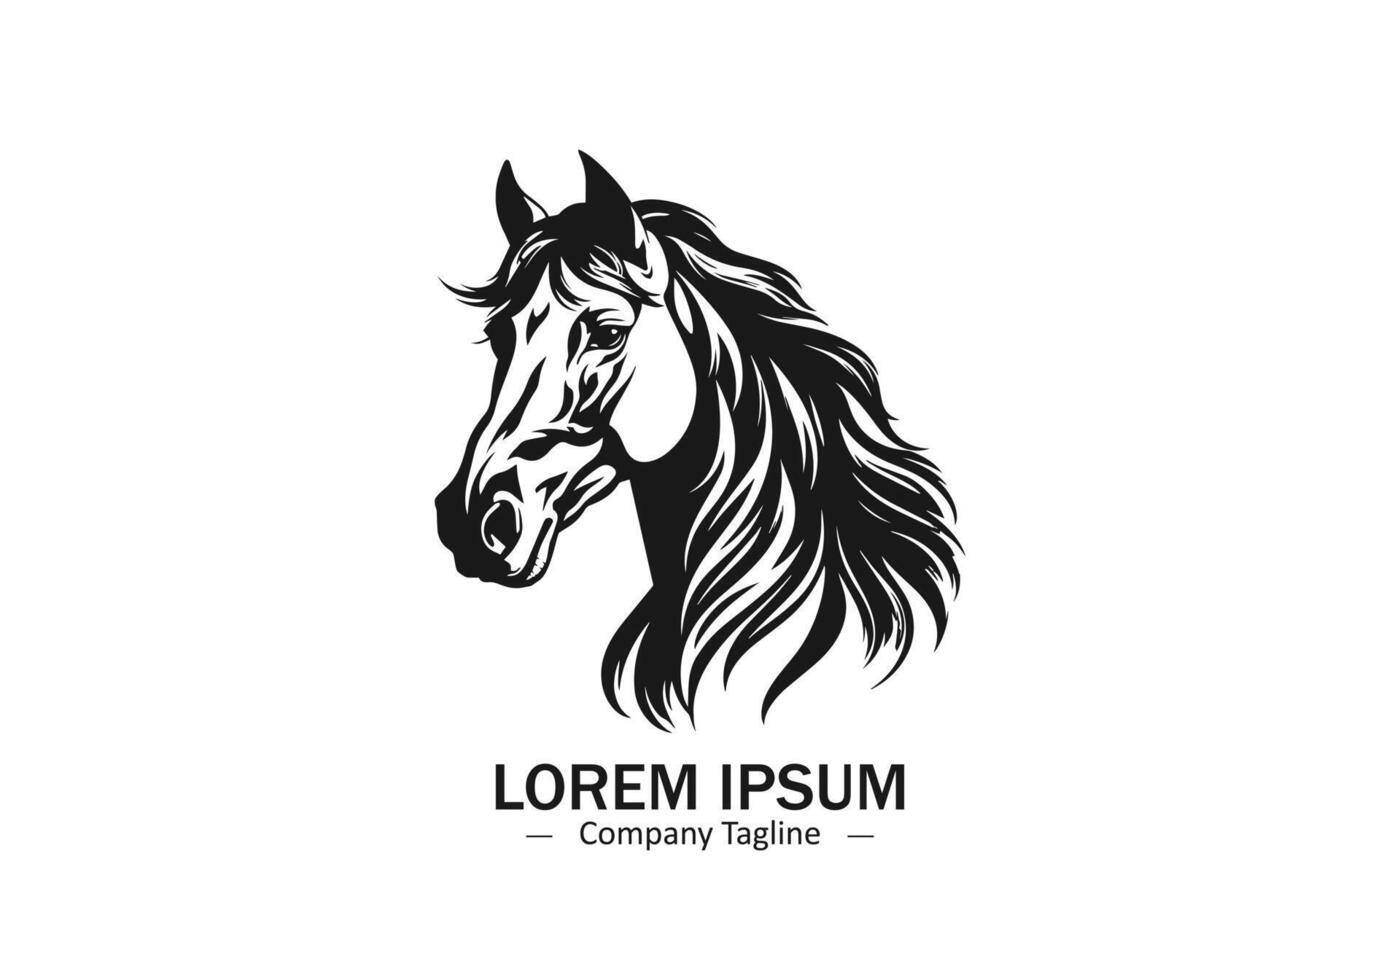 Horse head logo icon silhouette isolated on white background vector